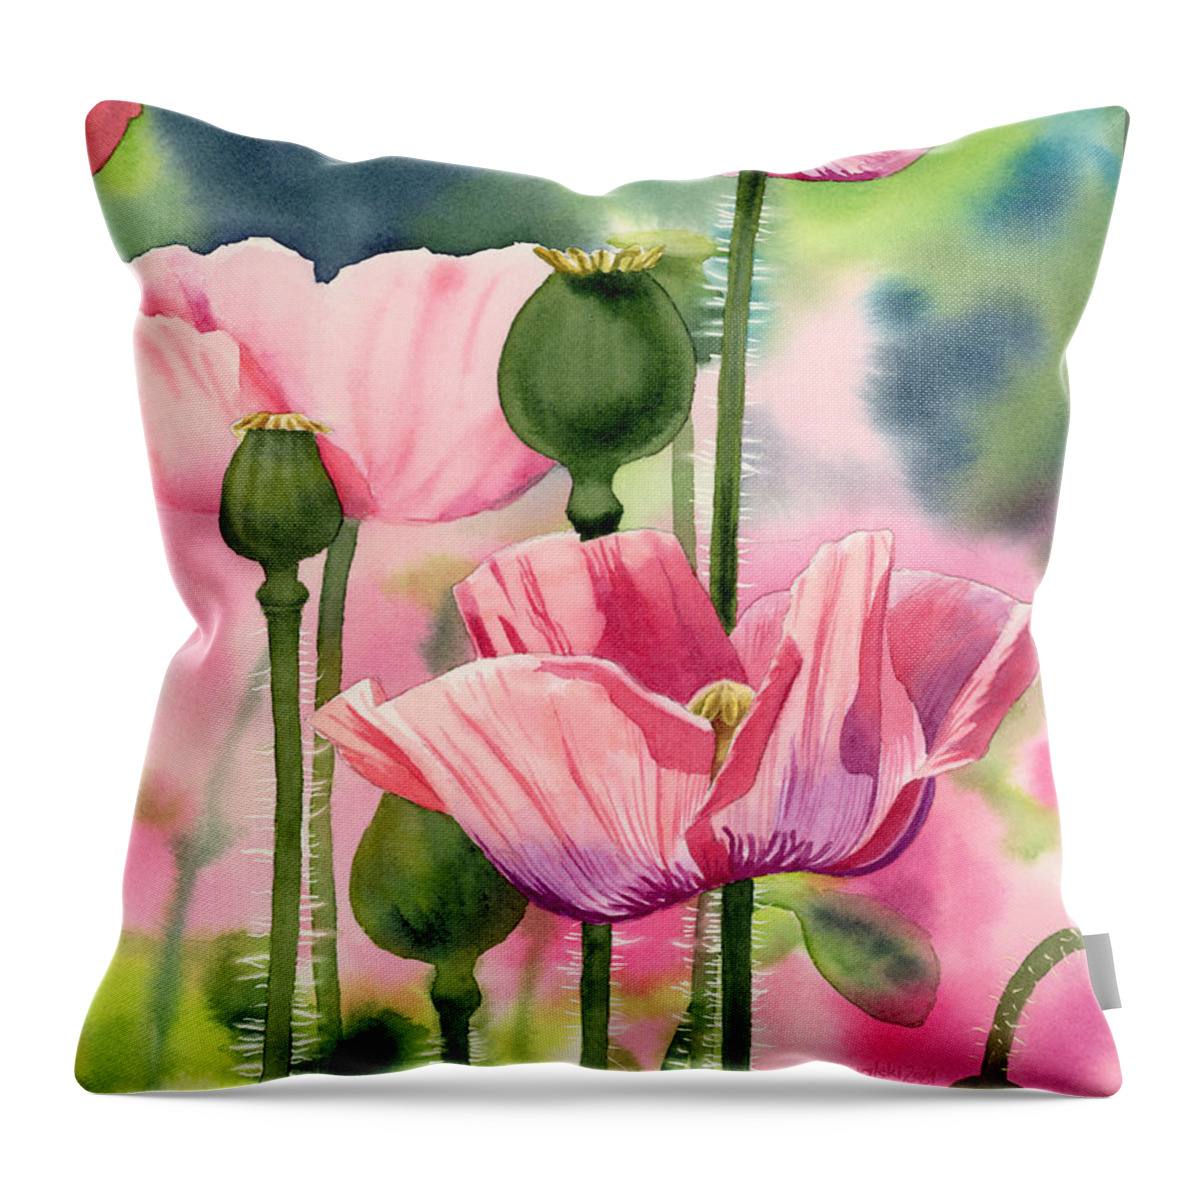 Pink Throw Pillow featuring the painting Pink Poppies by Espero Art